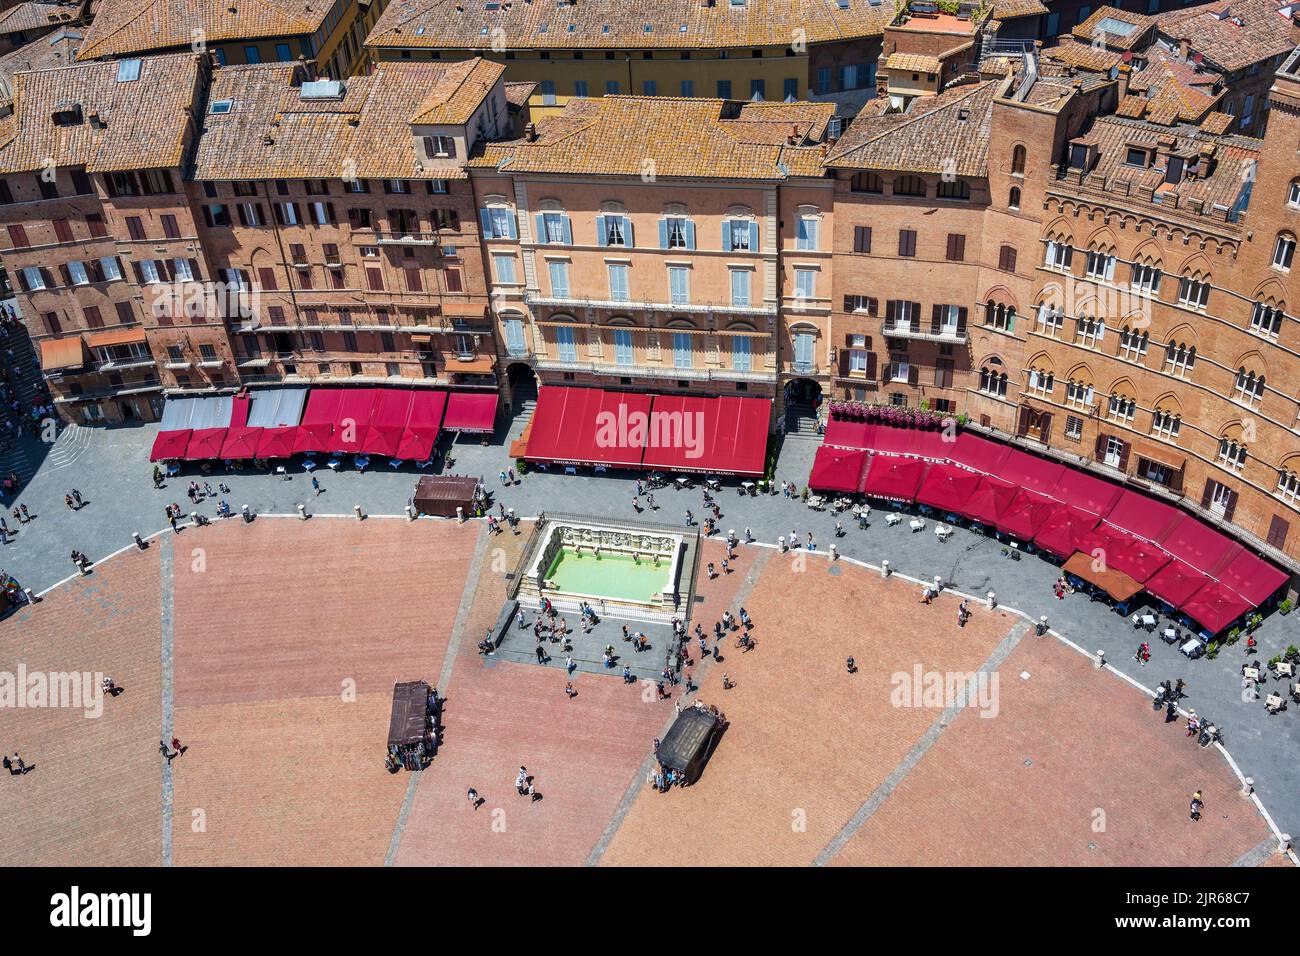 View looking down on Piazza del Campo from top of Torr del Mangia bell tower in Siena, Tuscany, Italy Stock Photo